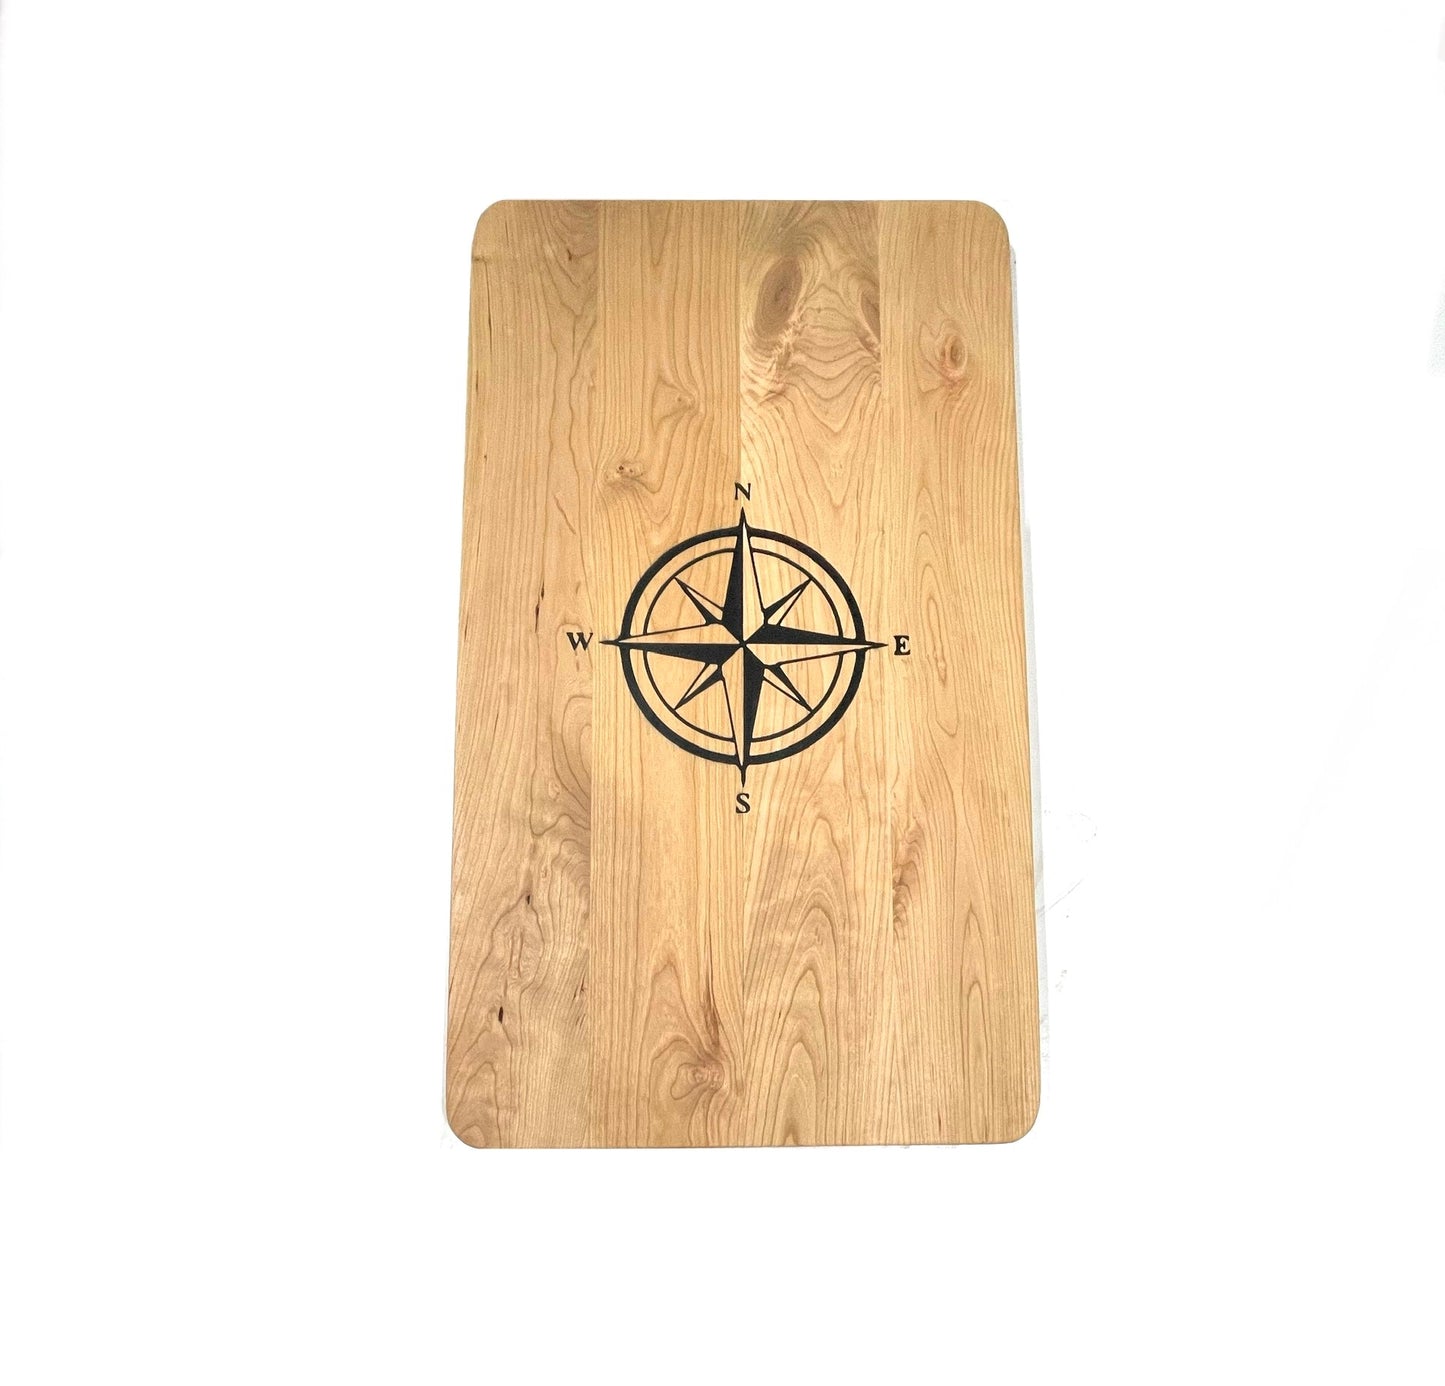 Cherry Boat Table with Compass Rose Inlay